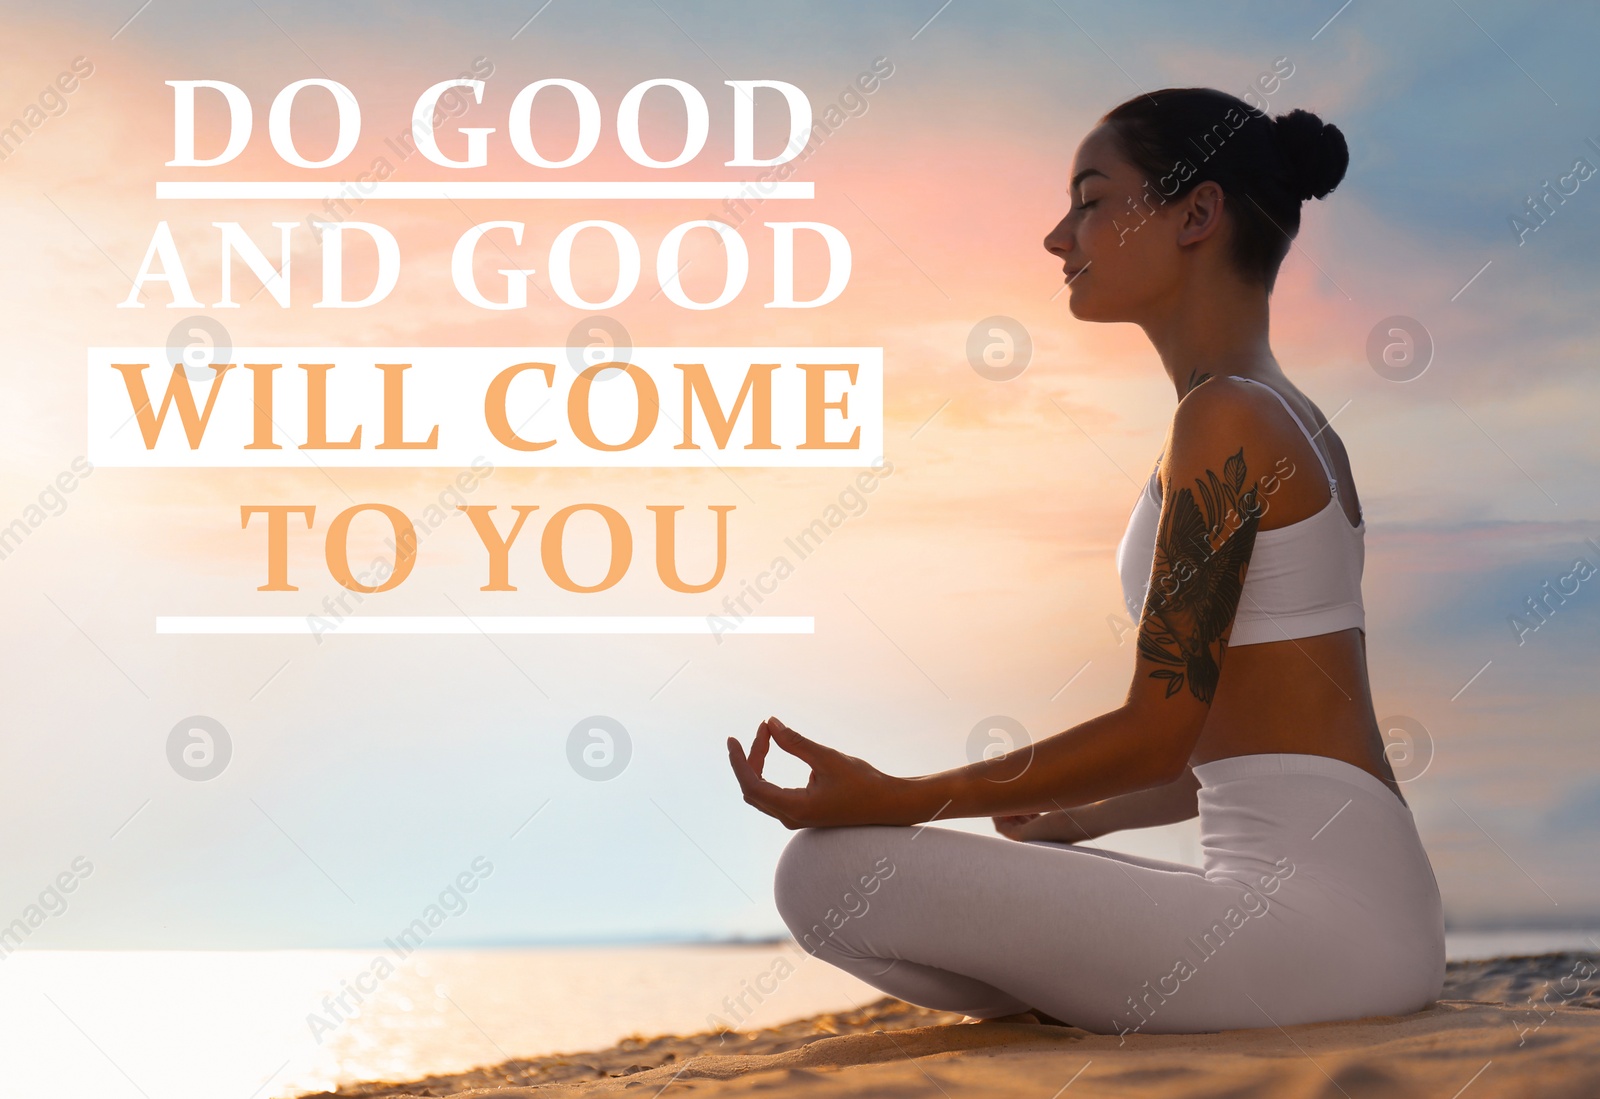 Image of Do Good And Good Will Come To You. Inspirational quote reminding about great balance in universe. Text against view of woman meditating near river in morning